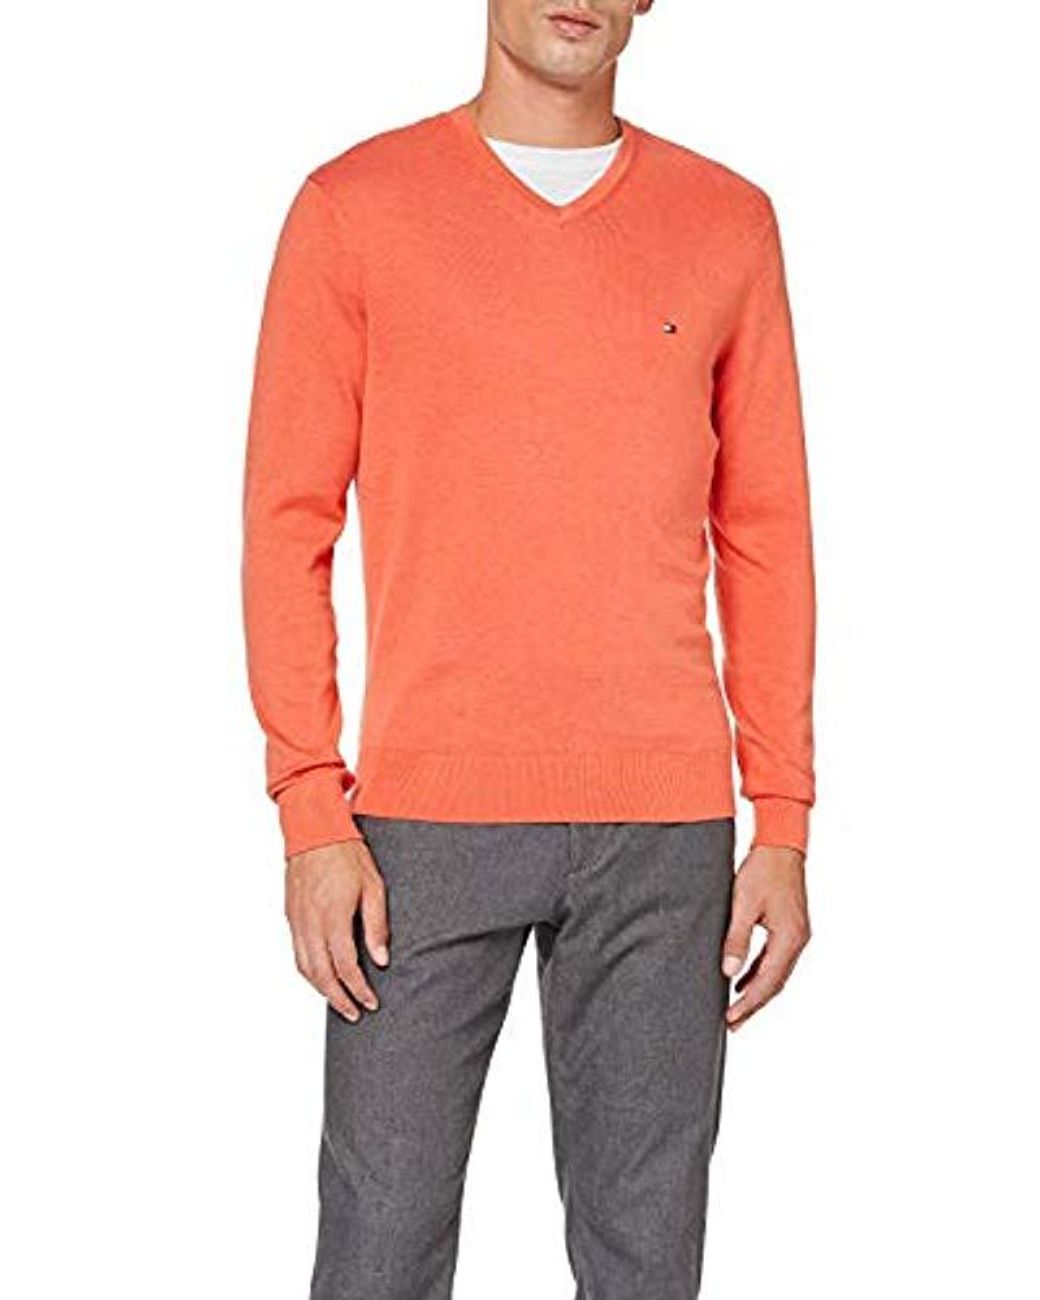 Sweaters Clothing, Shoes & Accessories Tommy Hilfiger Men's Orange L/S Pull  Over V-Neck Pima Cotton Sweater myself.co.ls